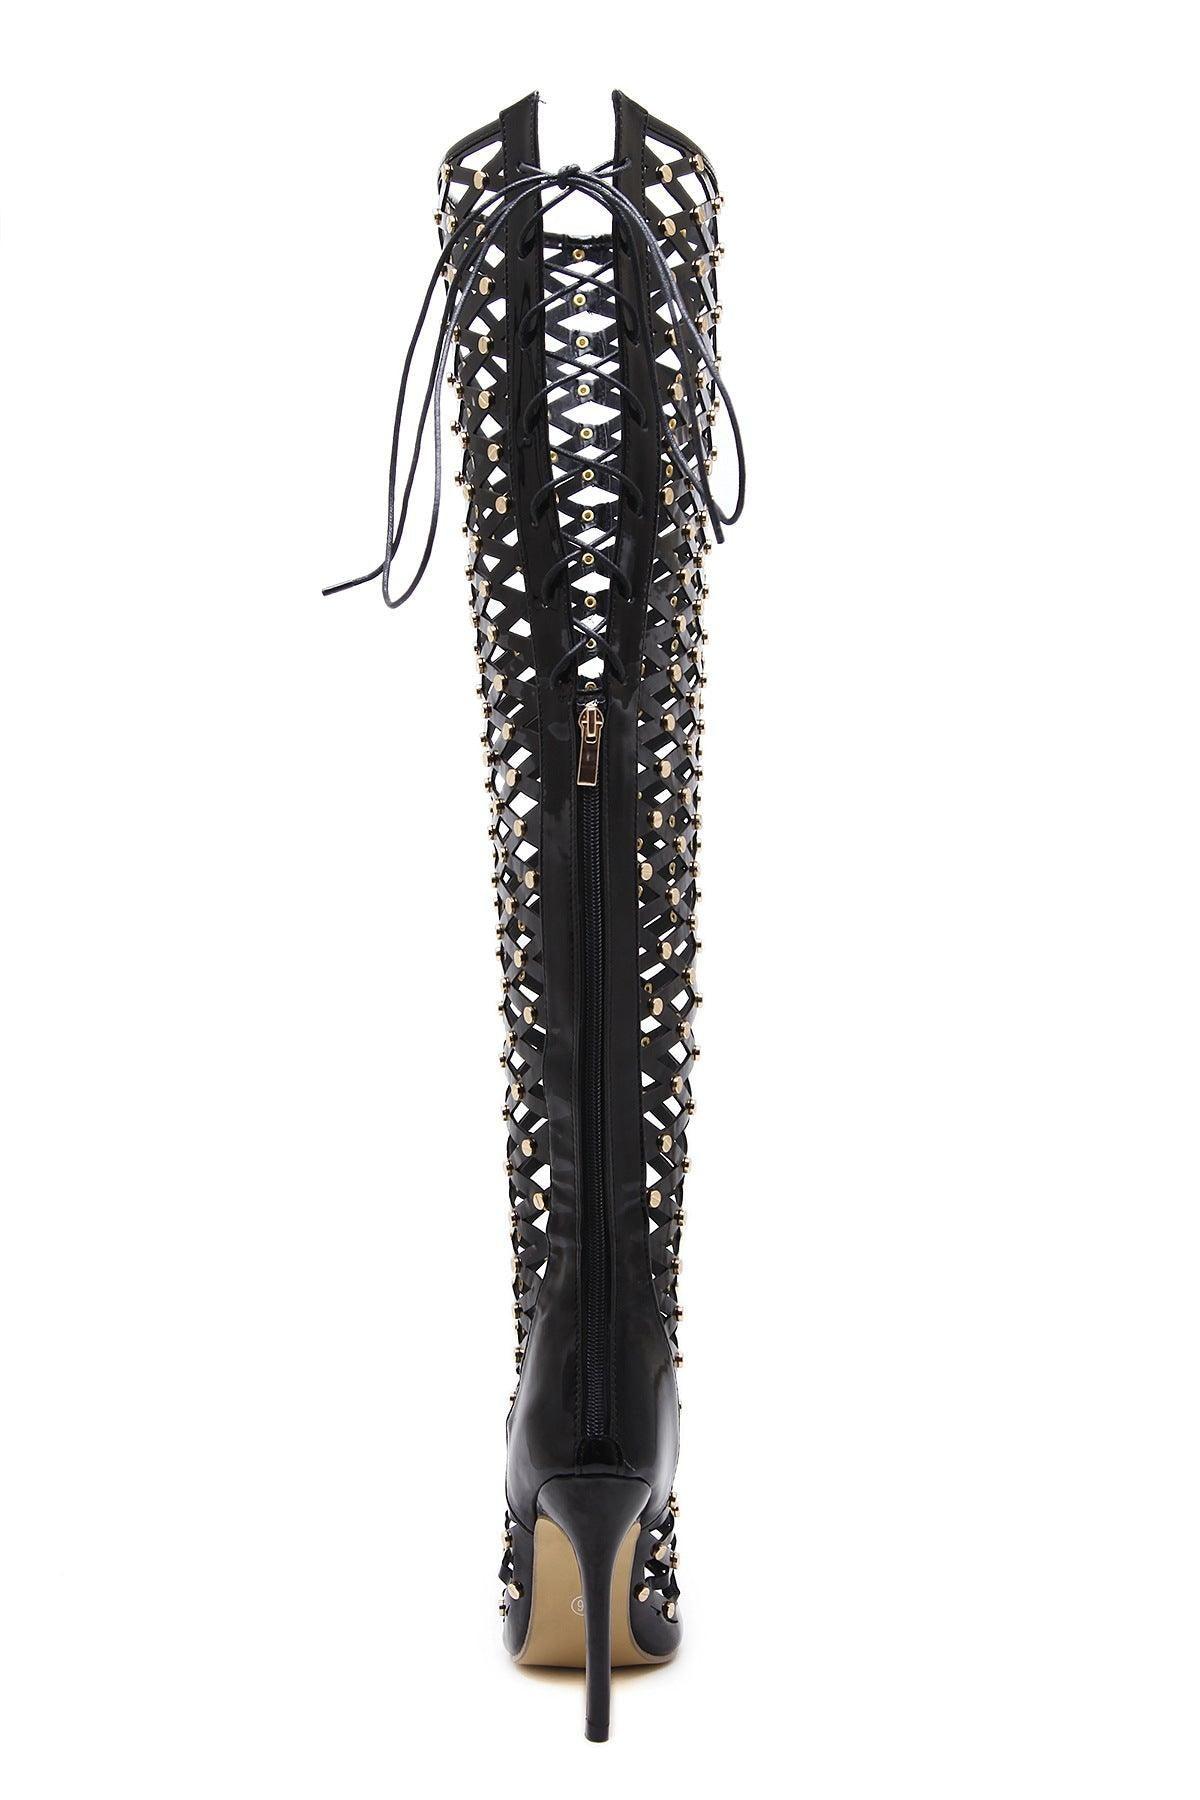 High Heels Stiletto Rivets Over the Knee Boots - ForVanity boots, women's shoes Shoes